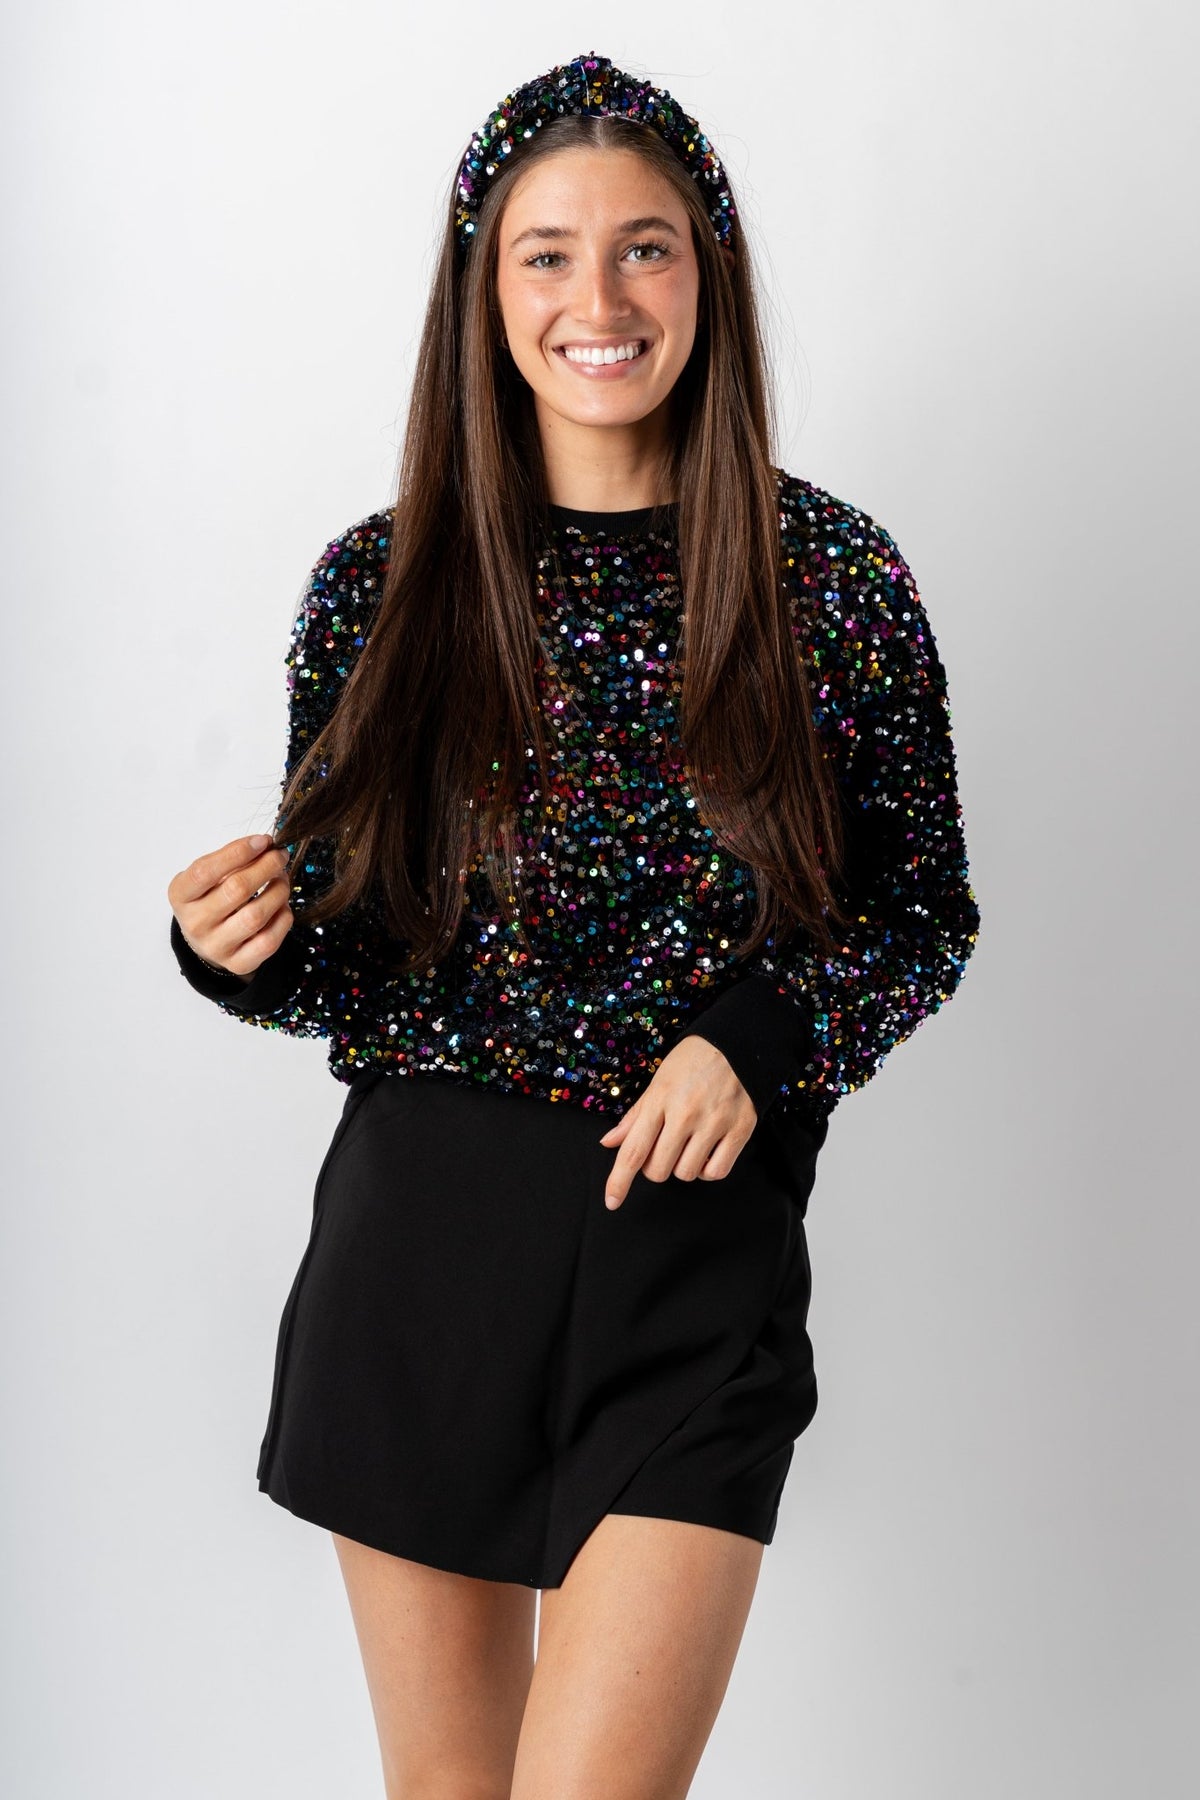 Fiesta sequin sweatshirt black - Trendy Holiday Apparel at Lush Fashion Lounge Boutique in Oklahoma City